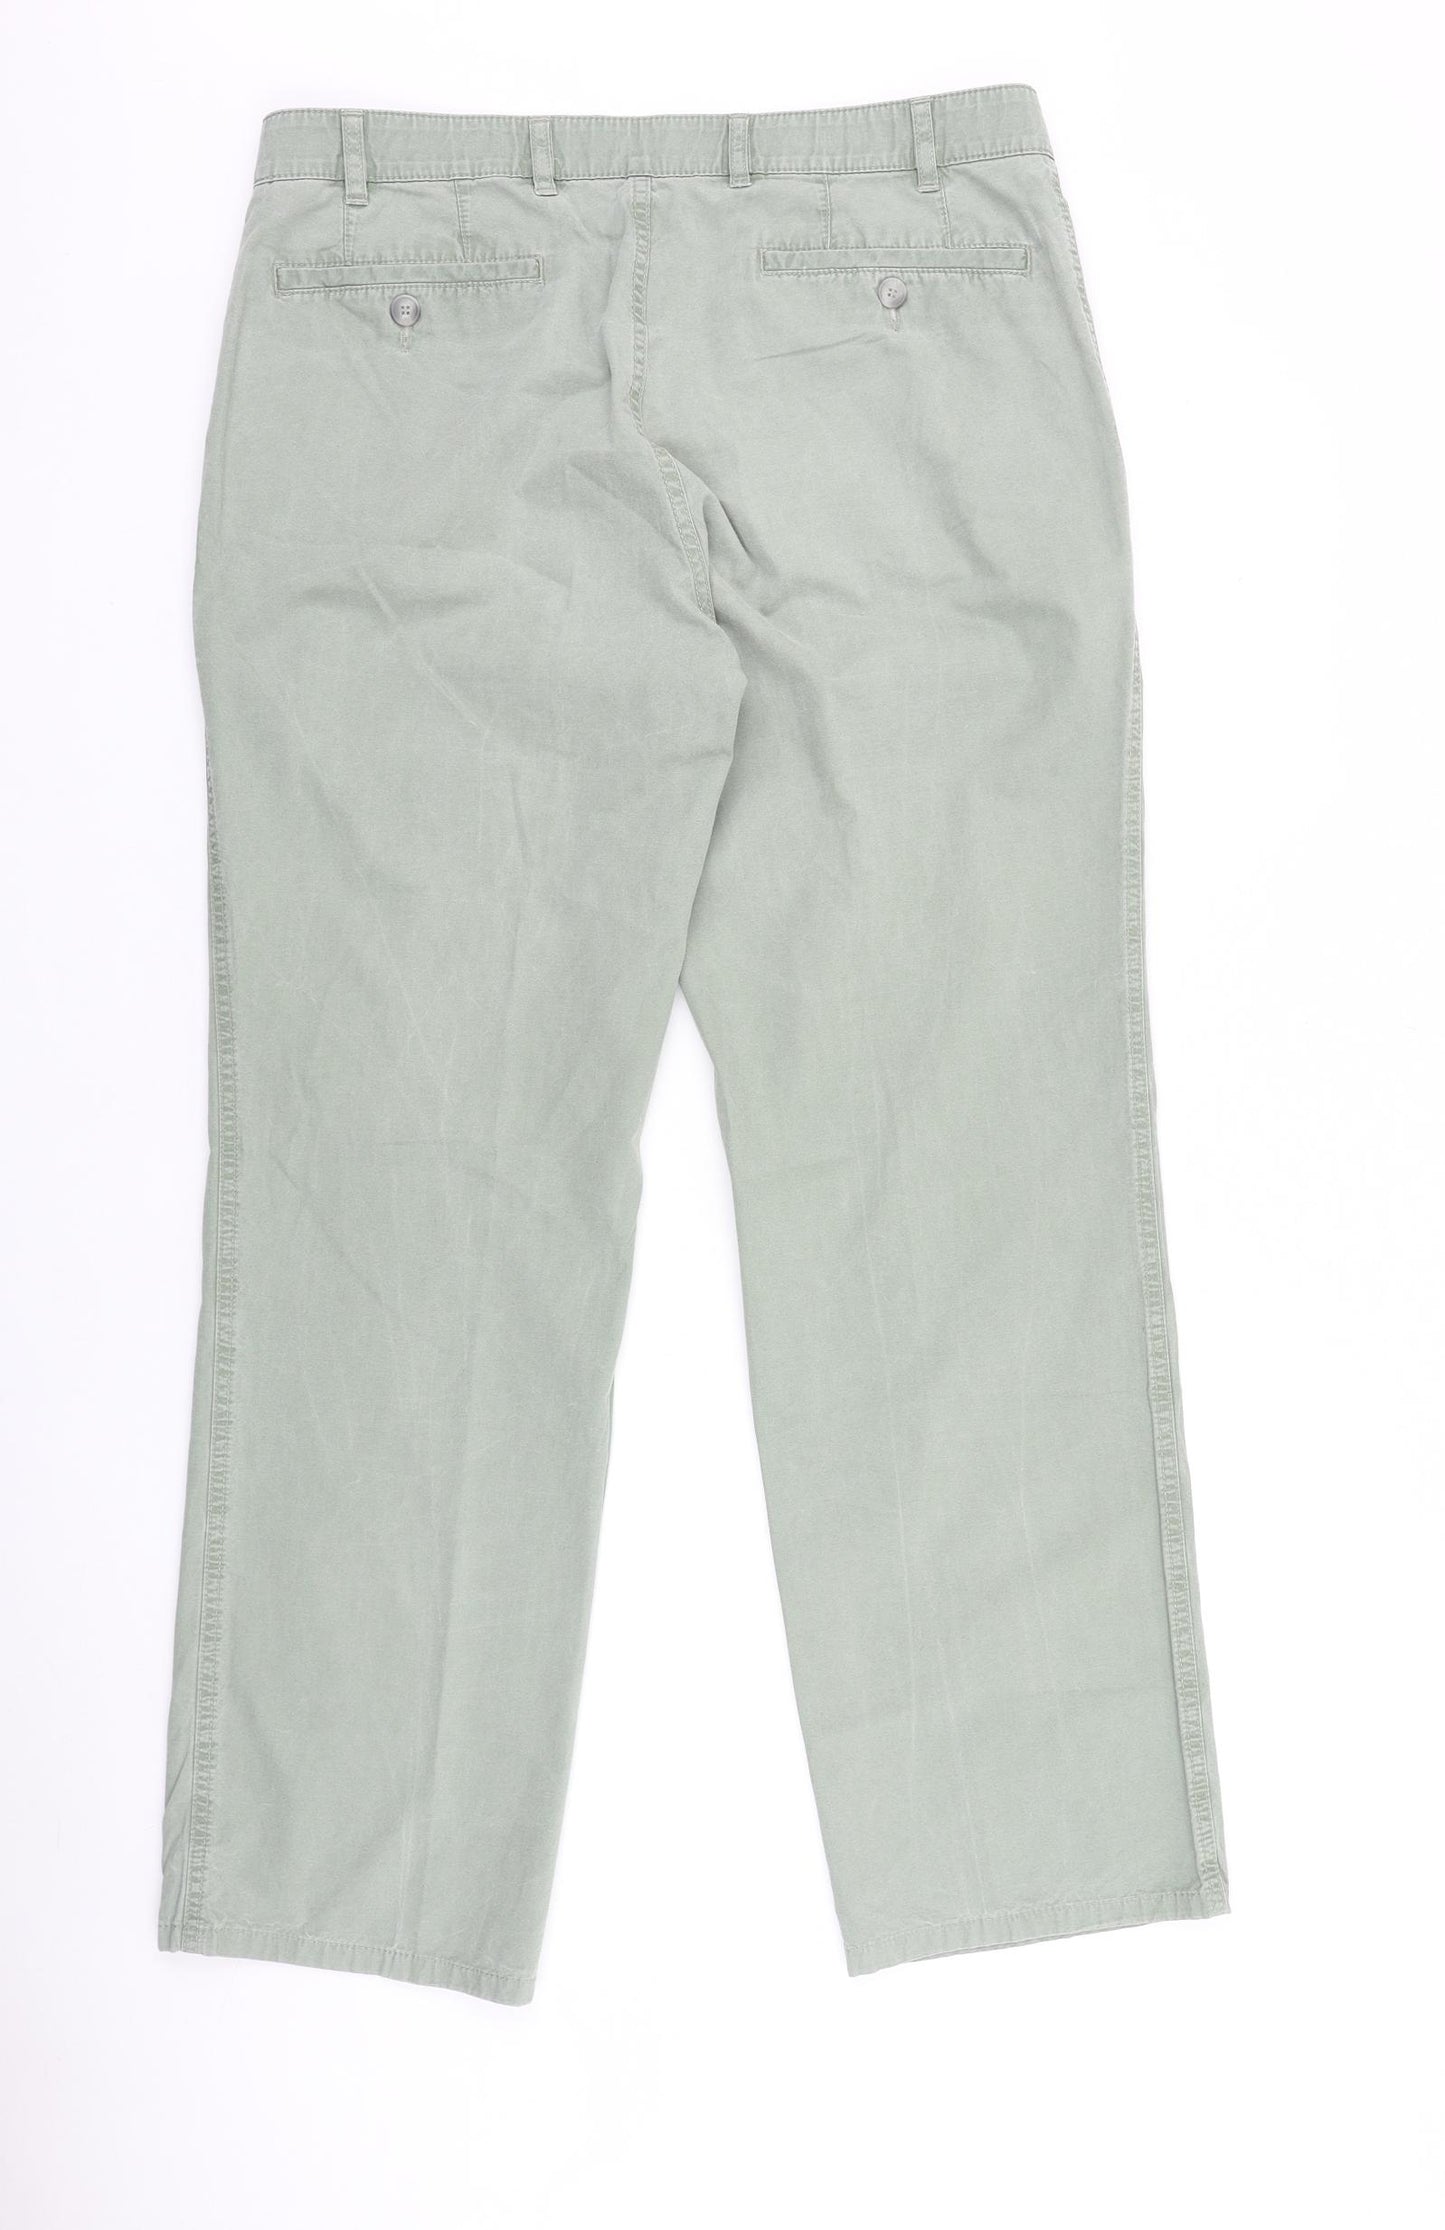 Brook Taverner Mens Green Cotton Chino Trousers Size 36 in L31 in Regular Zip